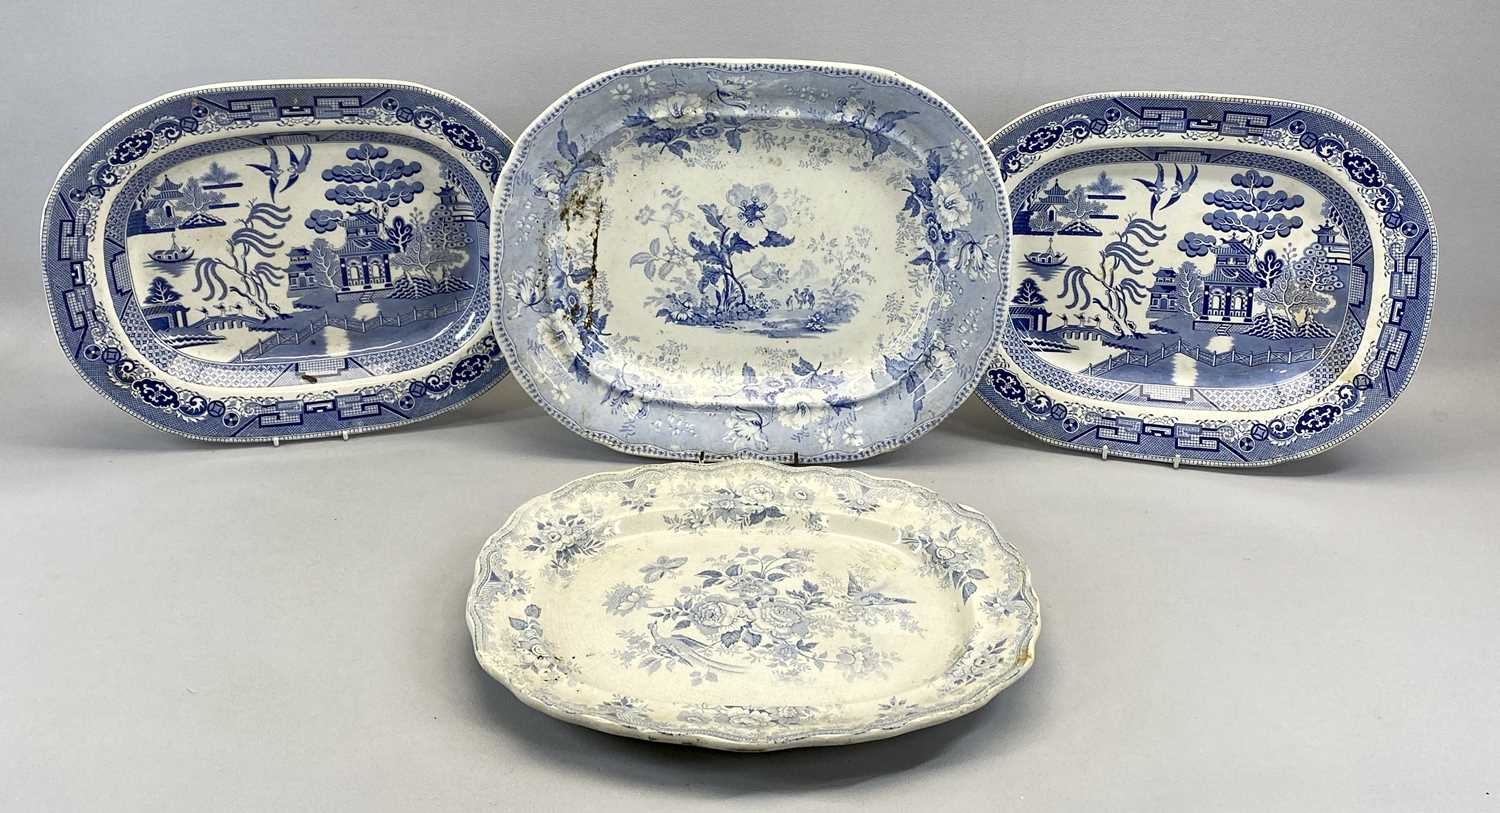 SIX VICTORIAN BLUE & WHITE WILLOW PATTERN TRANSFER DECORATED OVAL MEAT PLATES, 31.5 x 40cms (the - Image 2 of 3